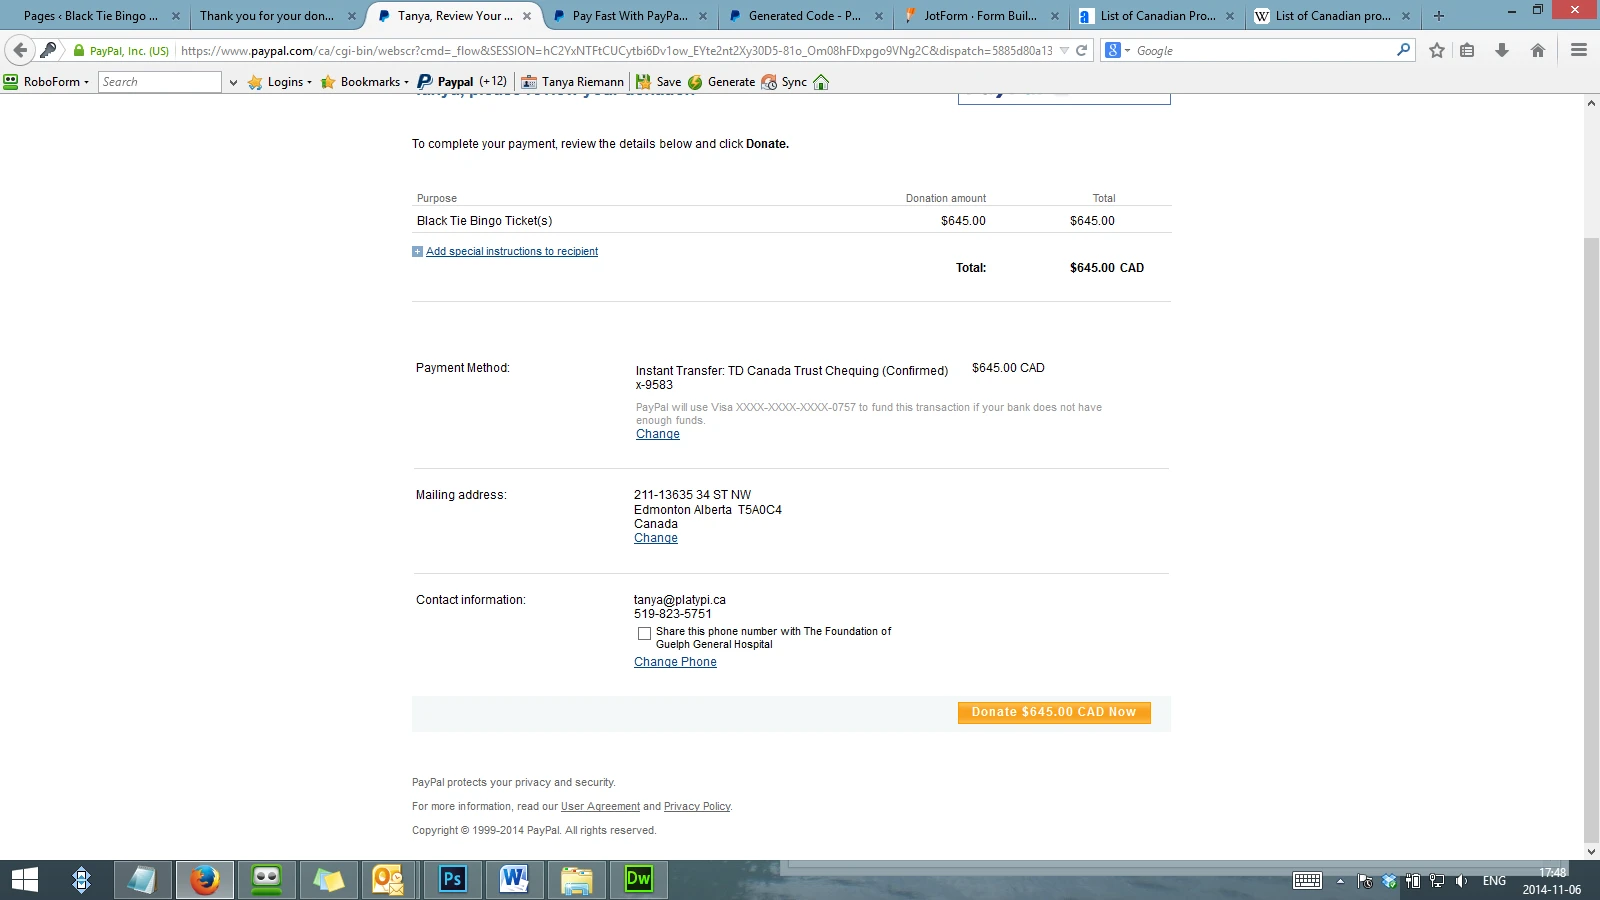 Ticket and donation form with calculations and integration to with paypal standard Image 1 Screenshot 20